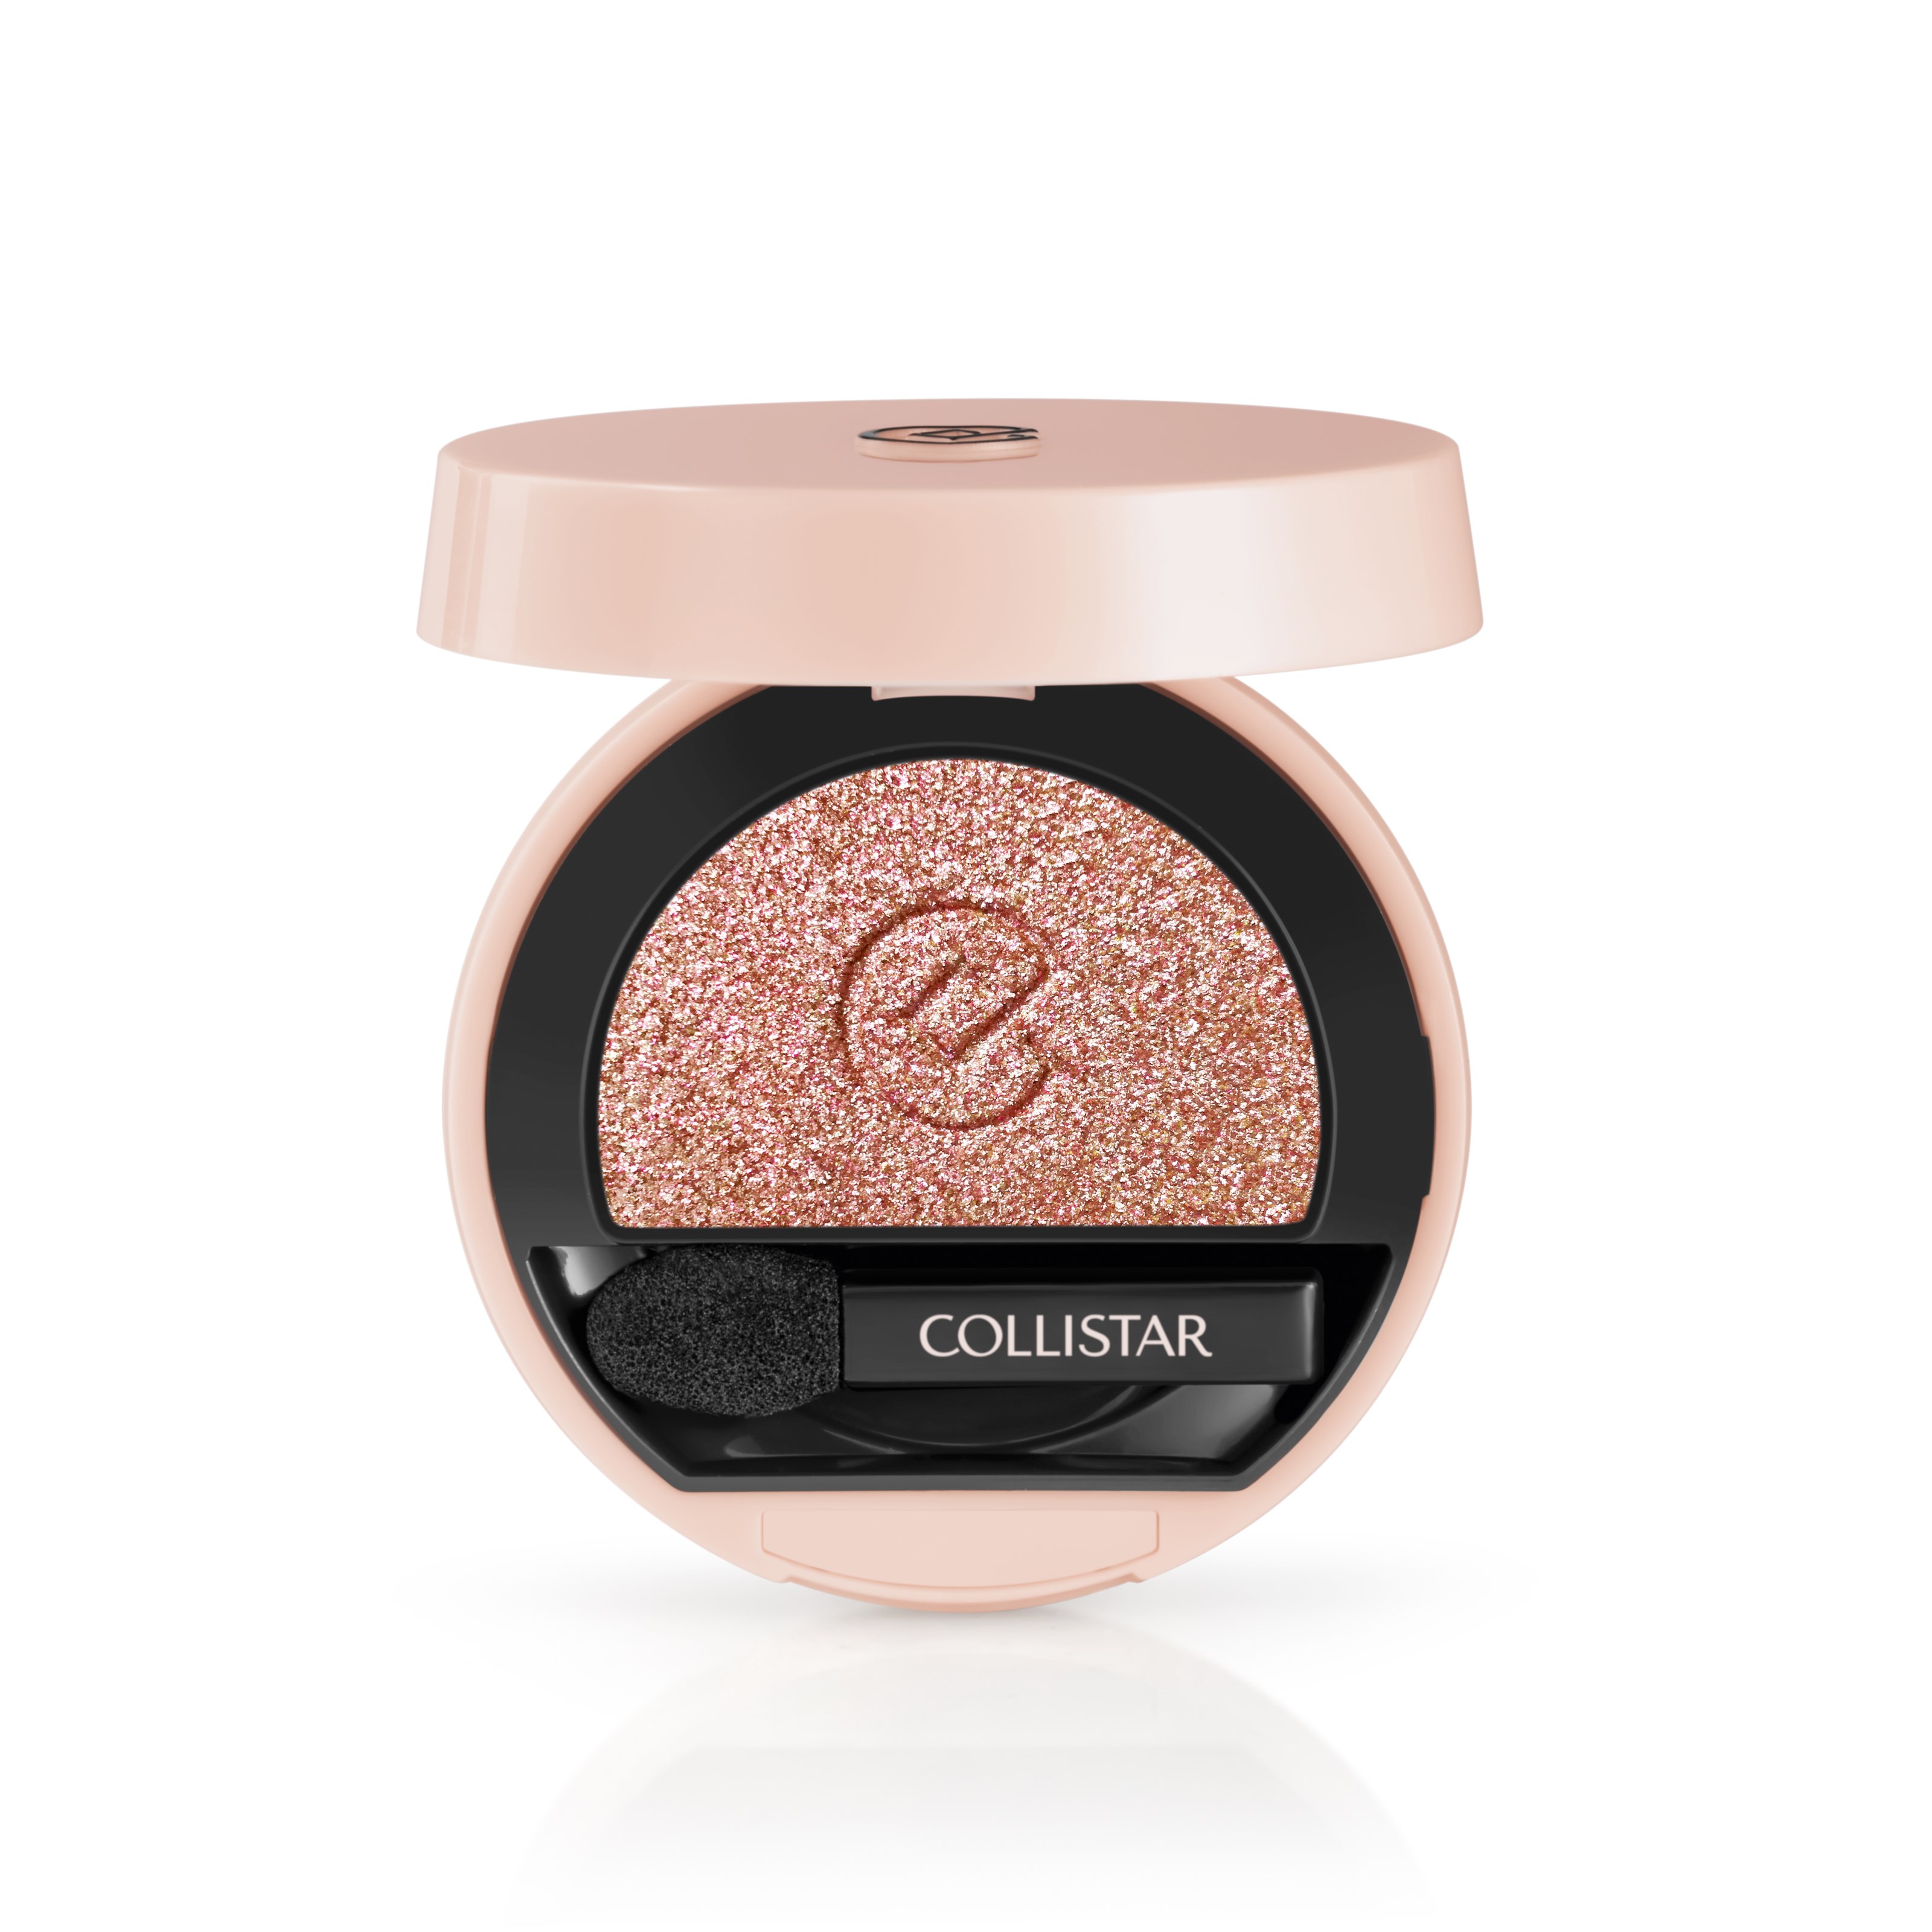 Collistar Impeccable Compact Eyeshadow 300 Pink Gold Frost